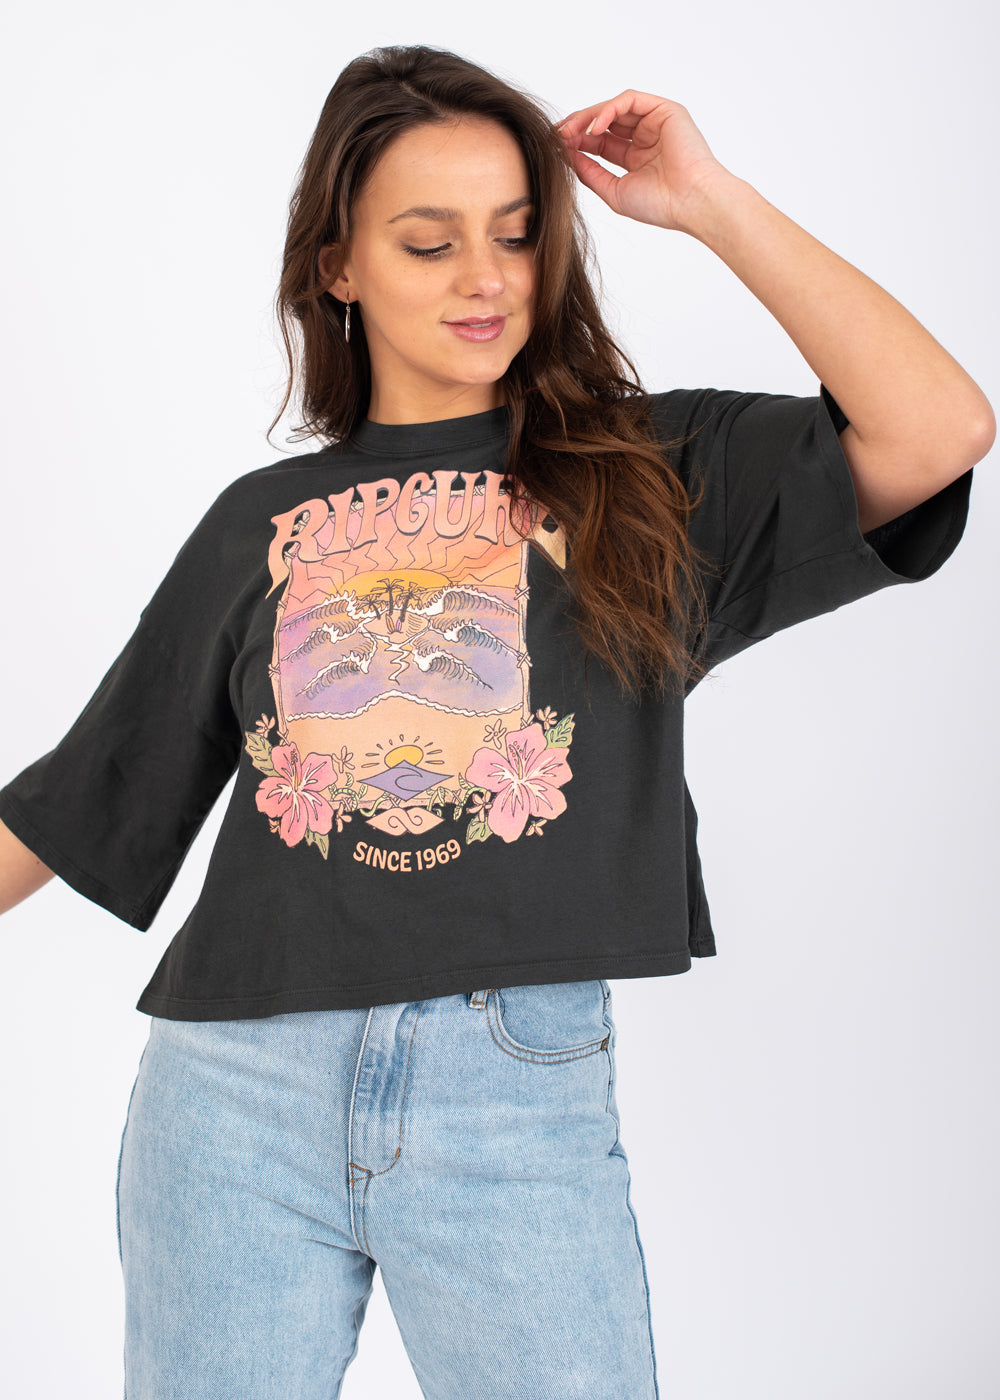 Beach by A Boutique The ocean shop | – Tee for Barrelled Rip Crop Curl Heritage lovers